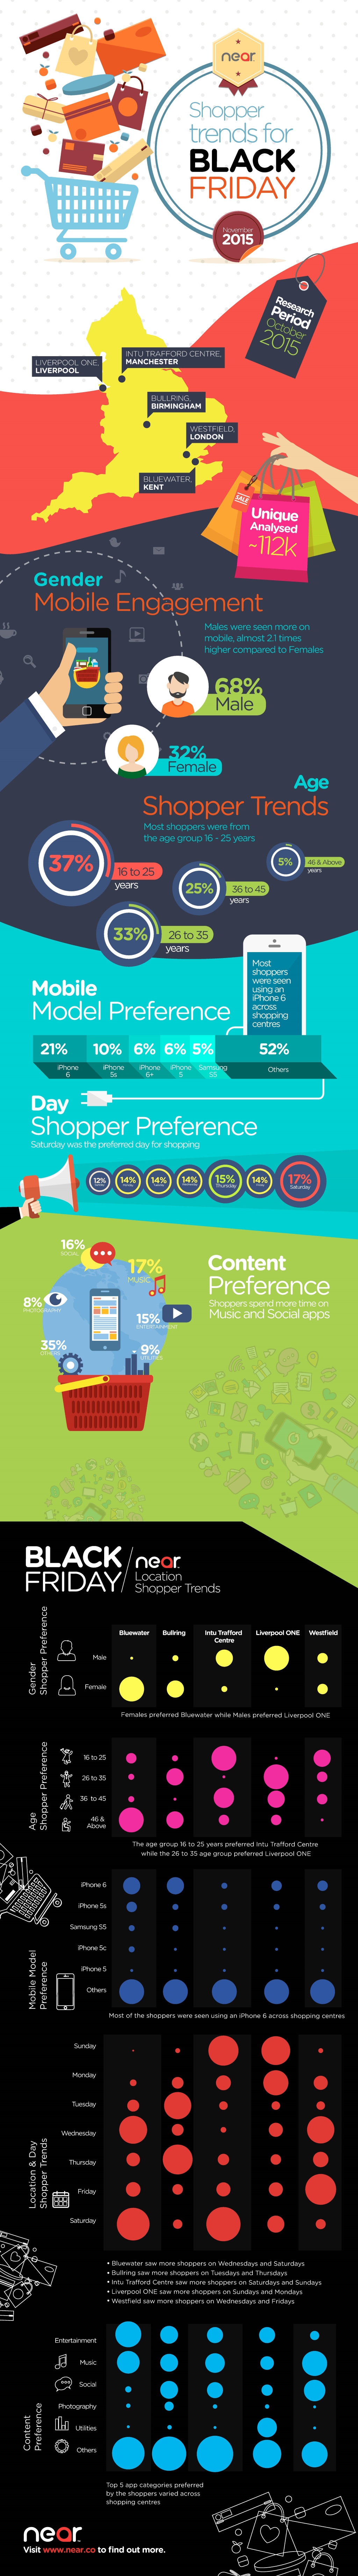 Infographic: Social Apps Lead the Way on Black Friday